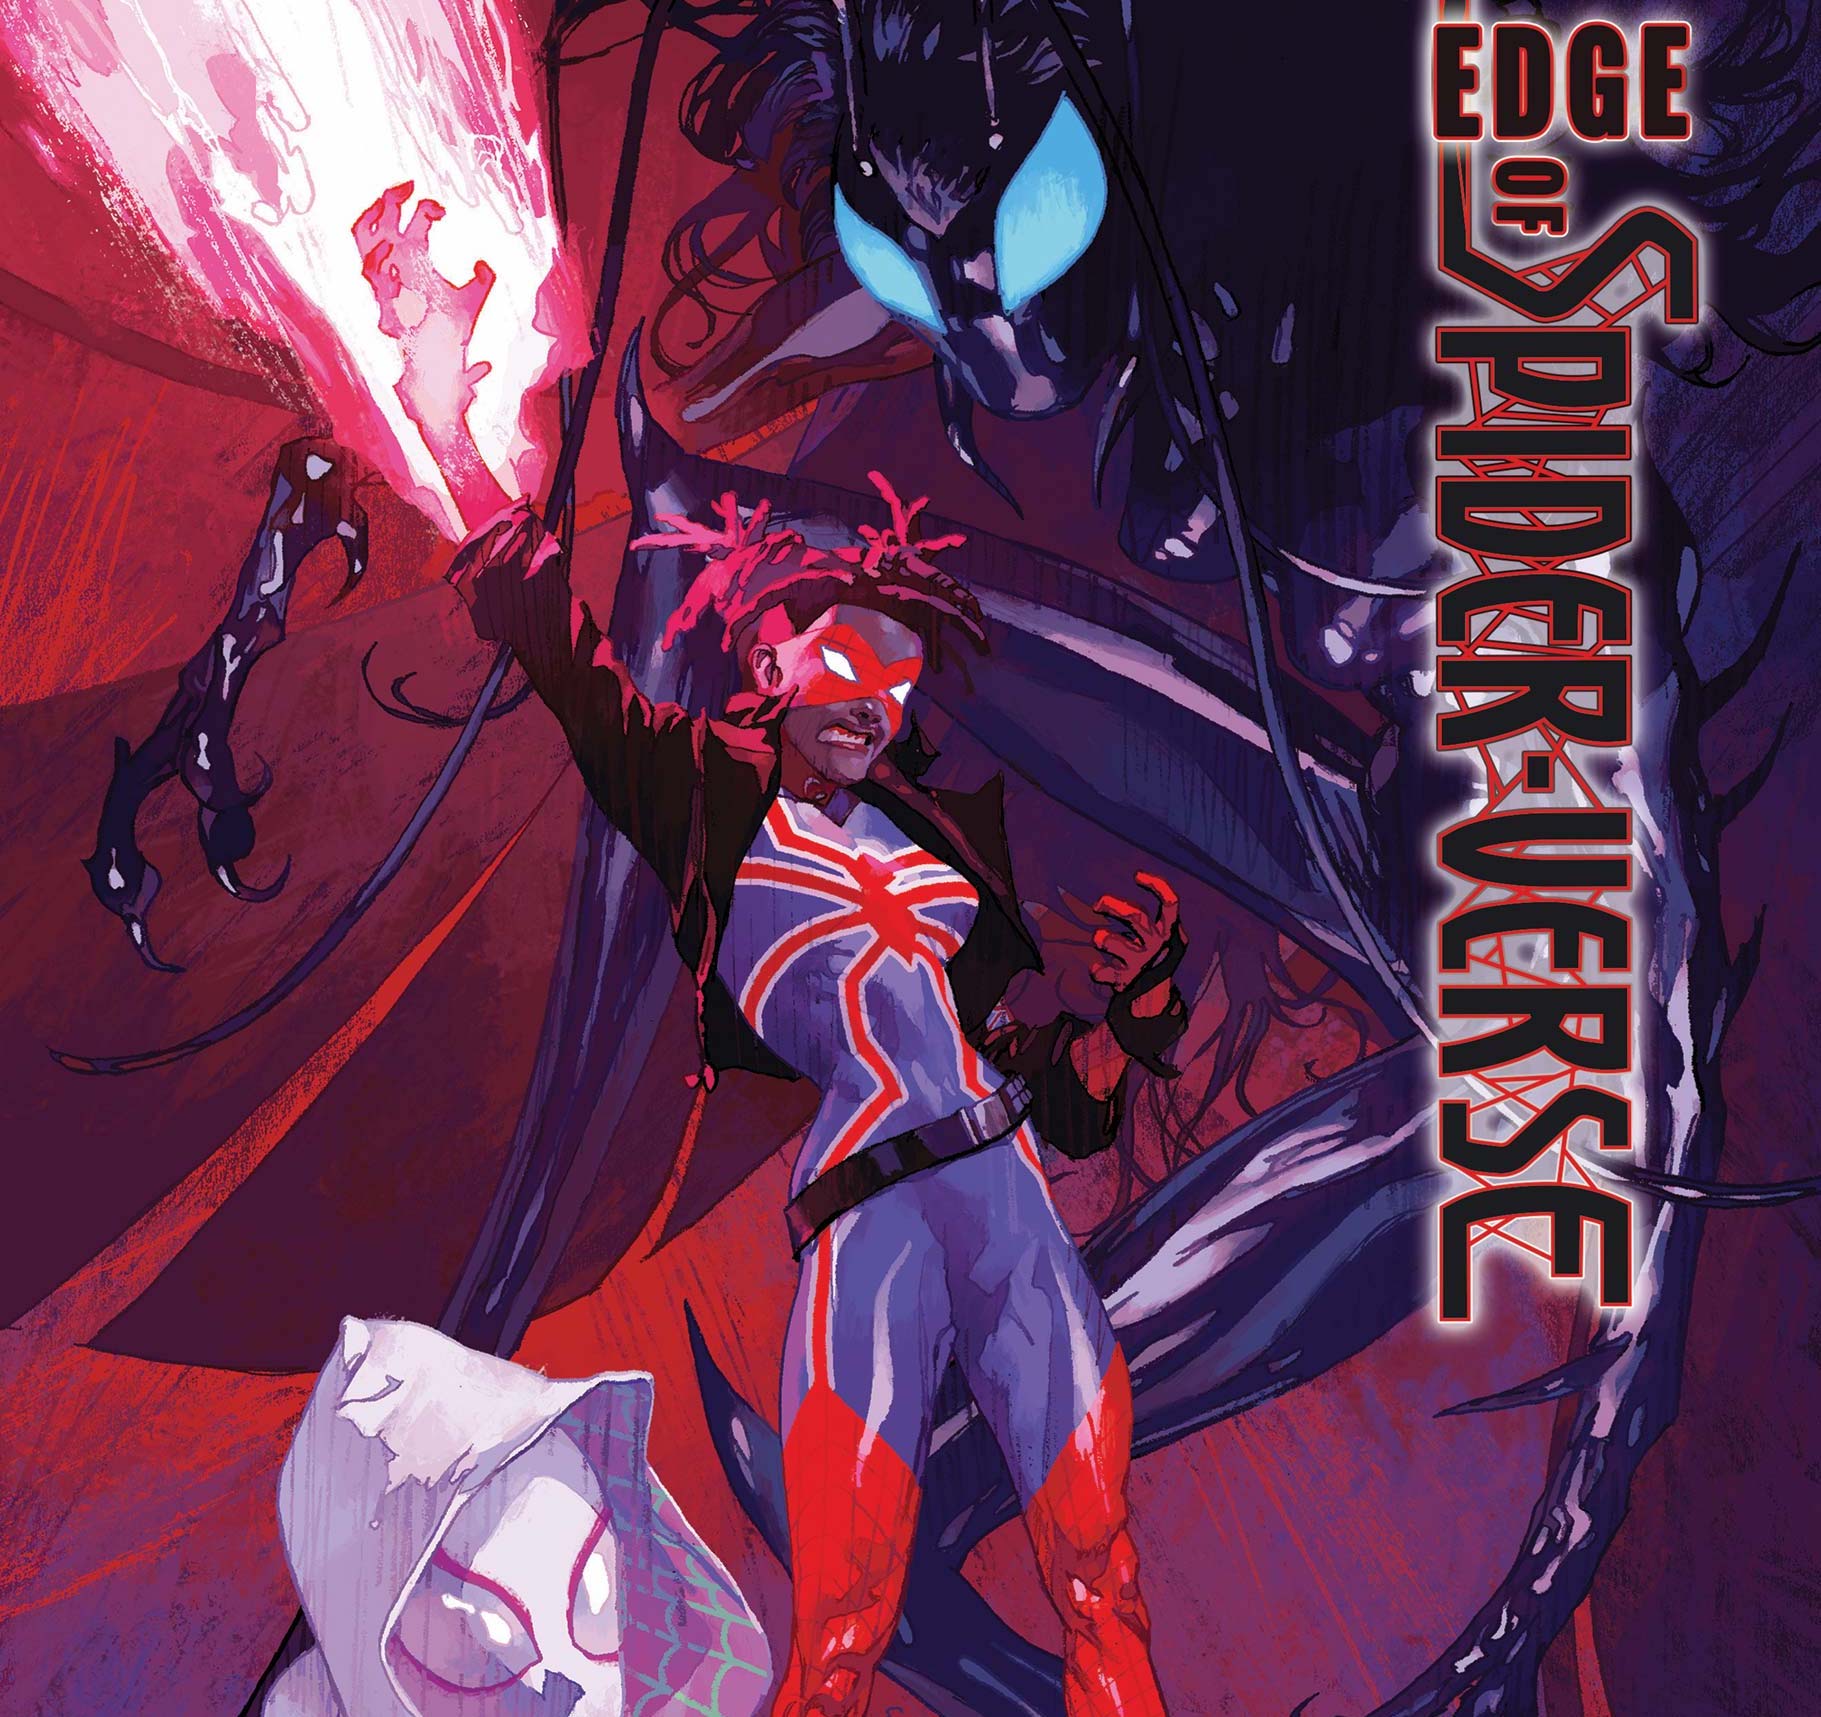 EXCLUSIVE Marvel Preview: Edge of Spider-Verse #2